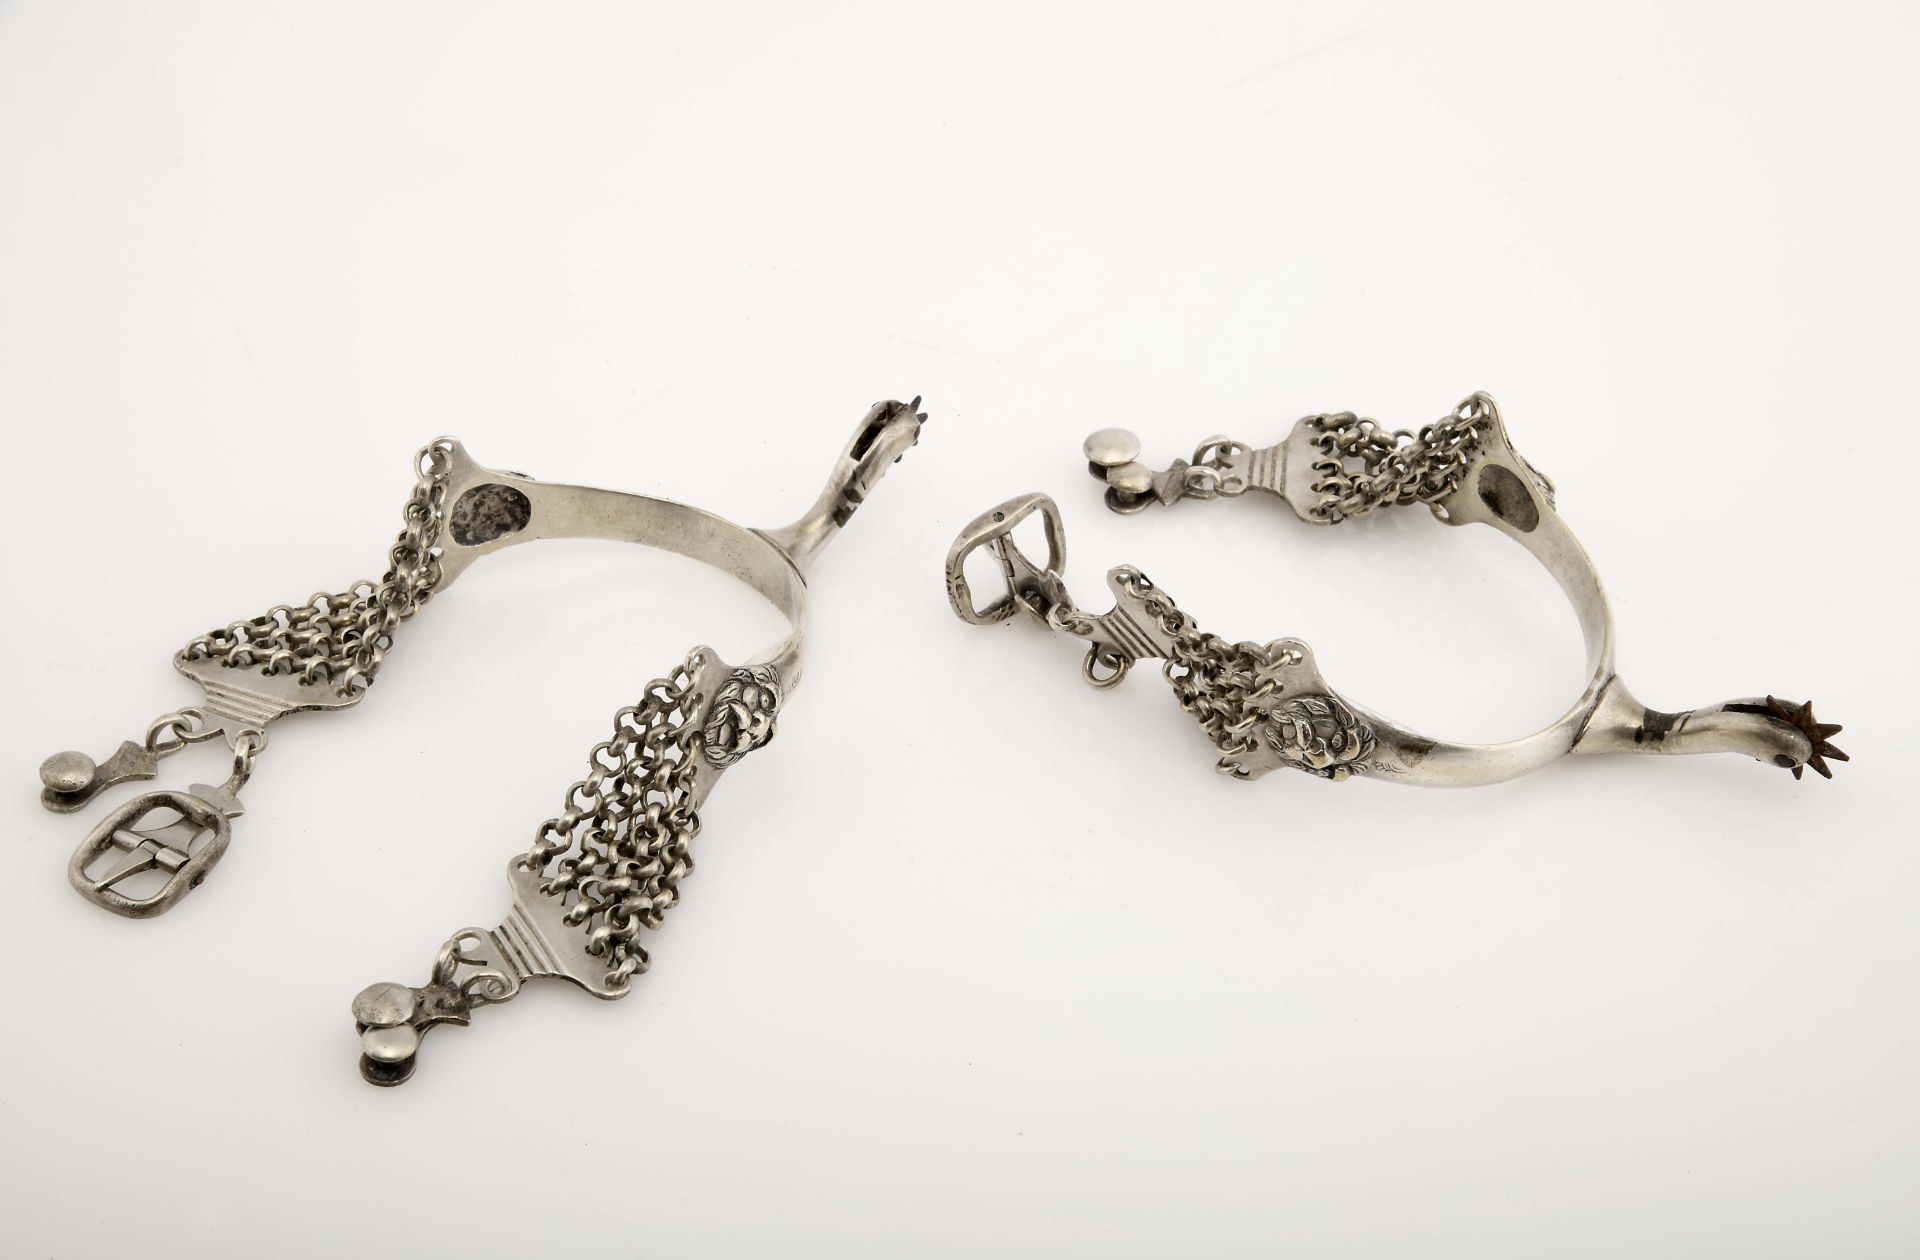 A pair of spurs with chains